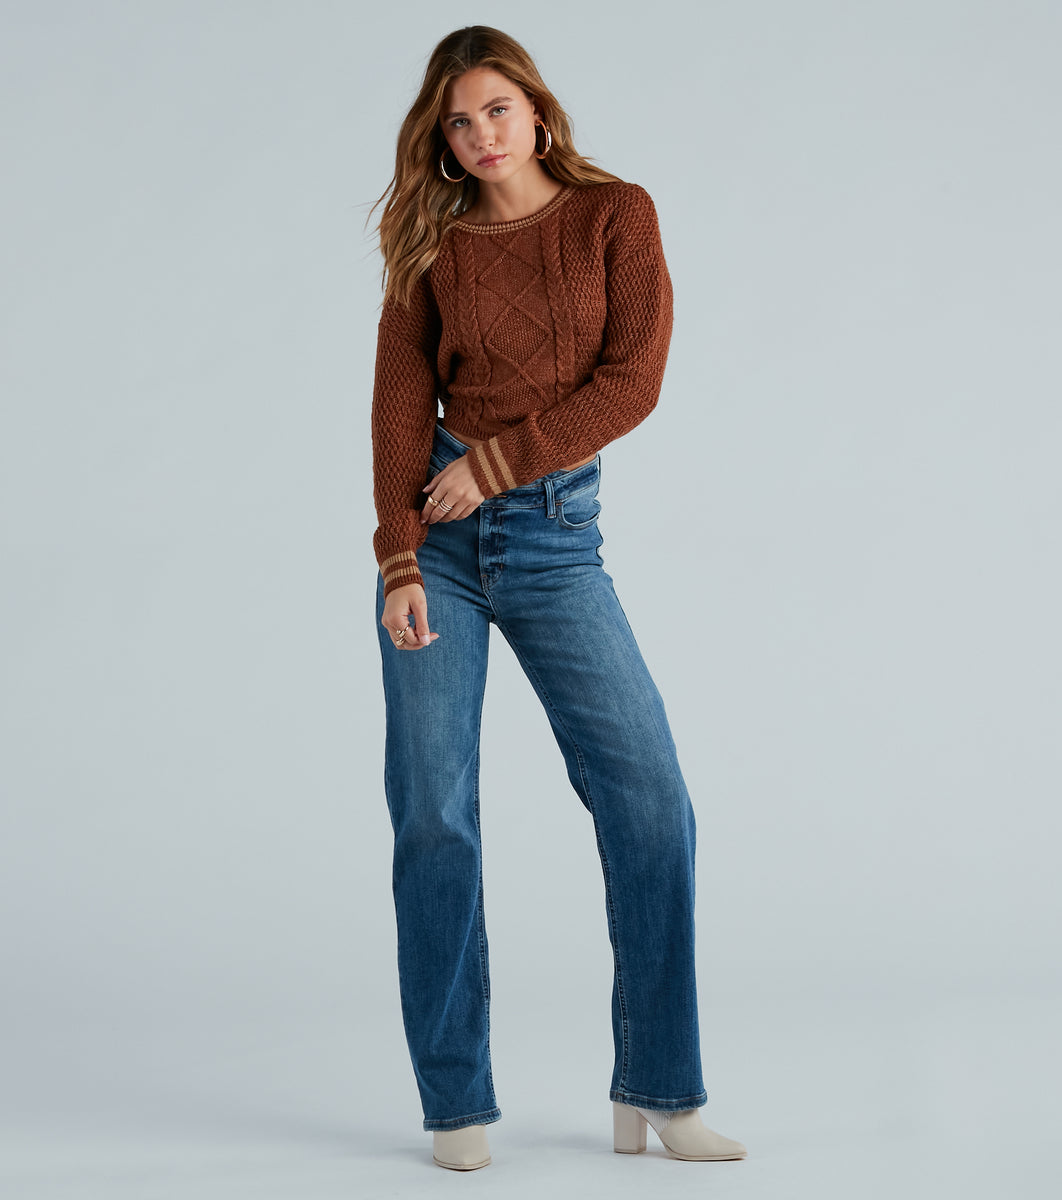 Tied Together Style Striped Cable Knit Sweater